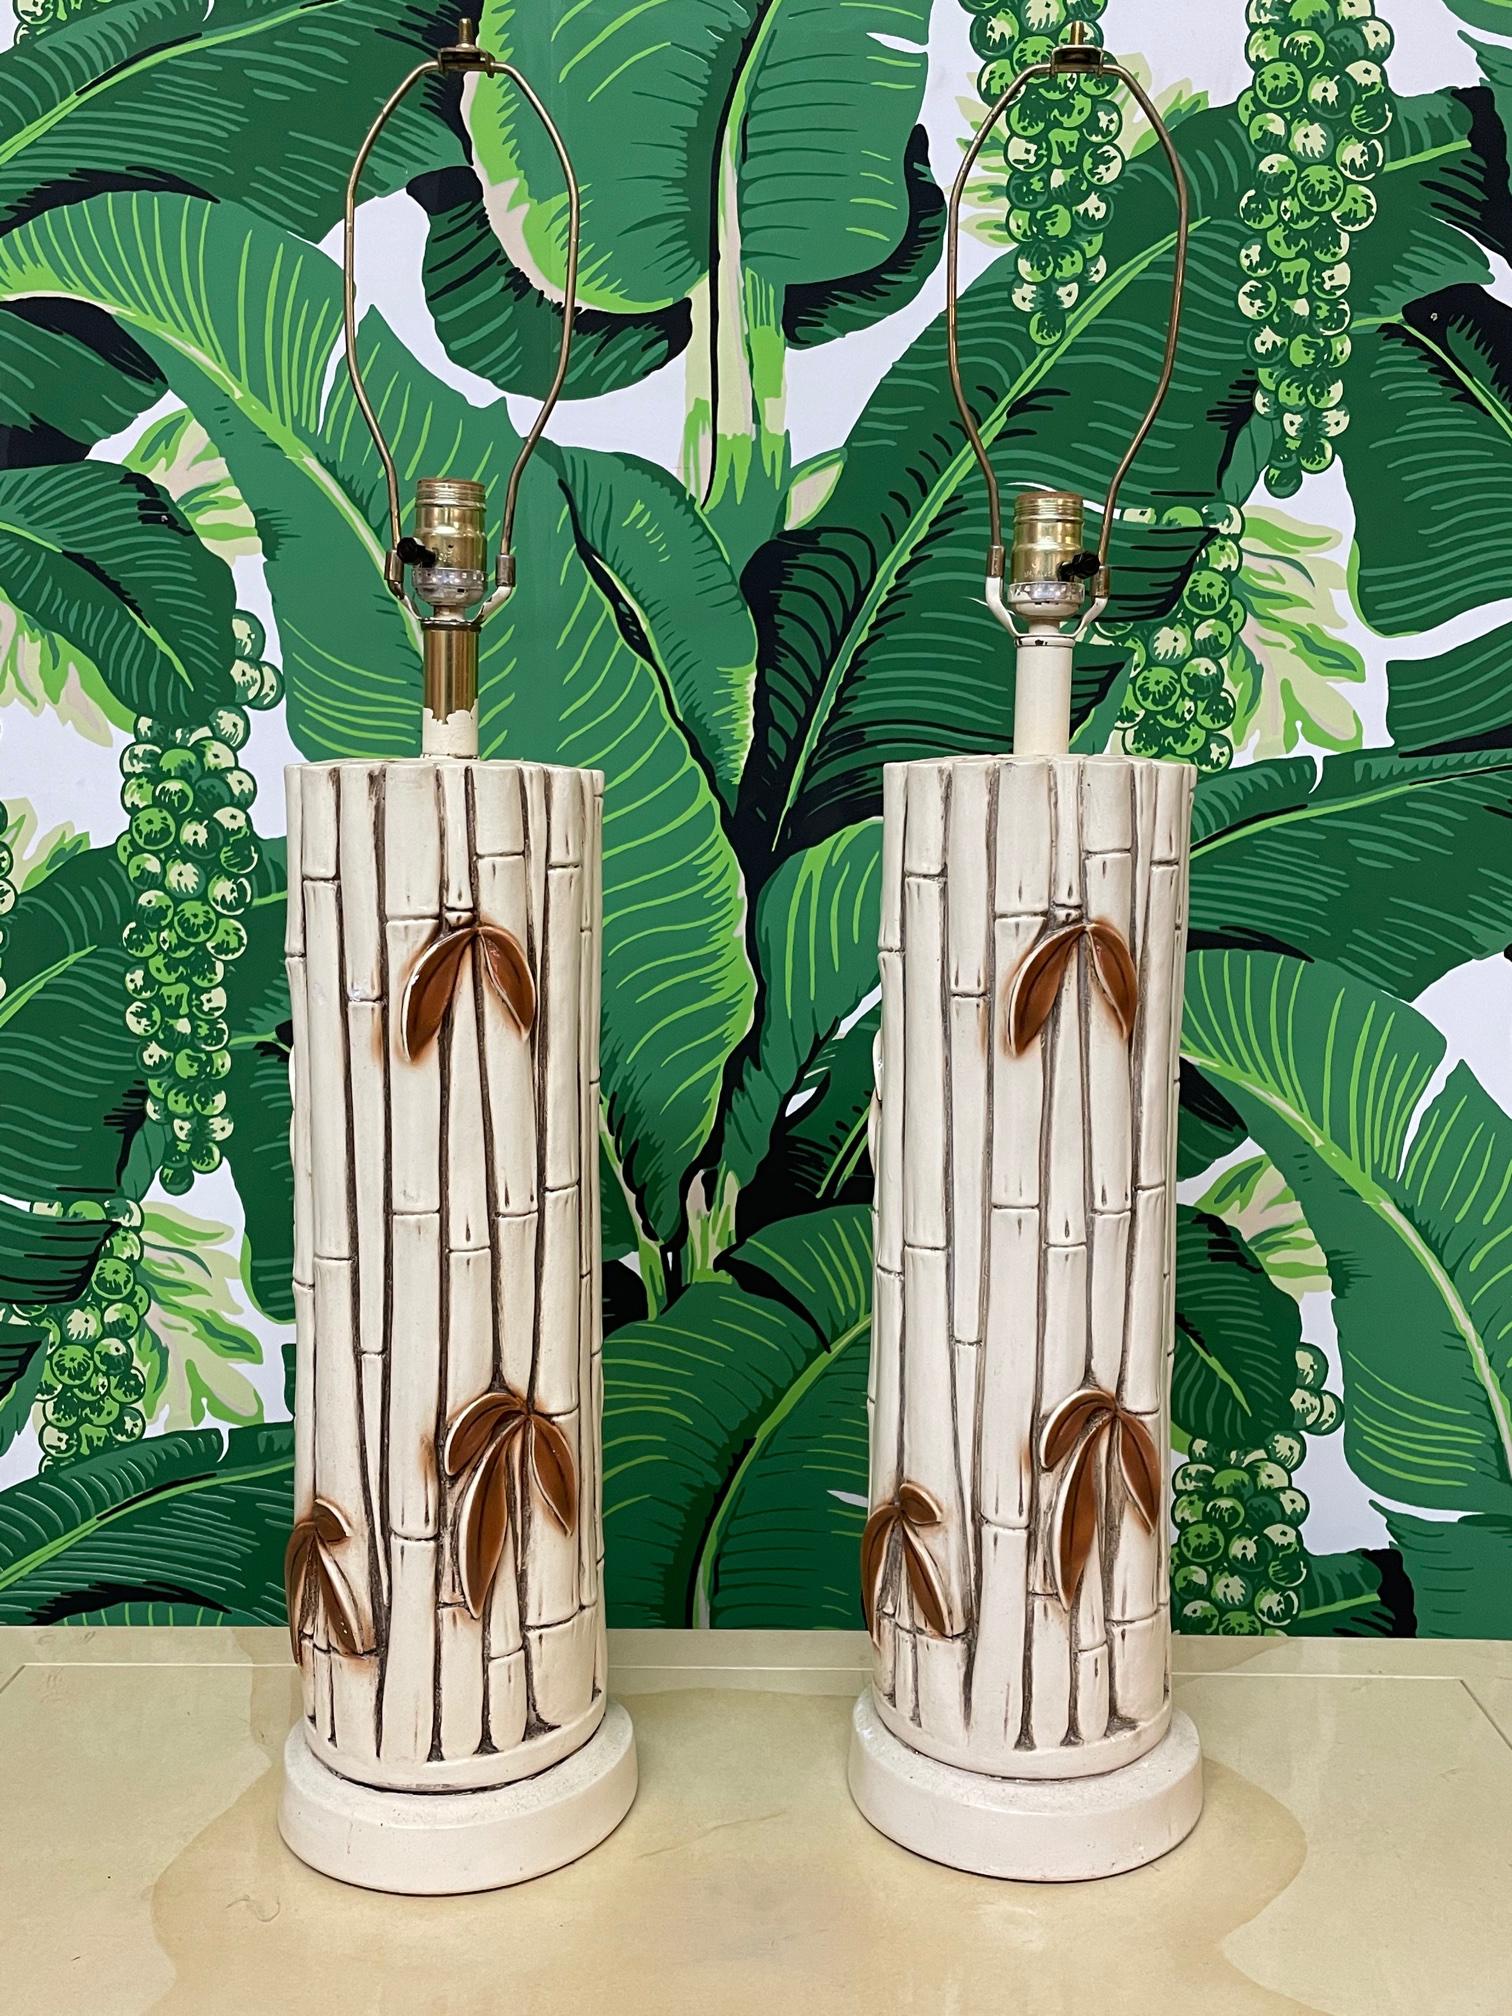 Pair of vintage table lamps in faux bamboo style. Ceramic / plaster composition. Very good condition with only very minor imperfections consistent with age (see photos).
 